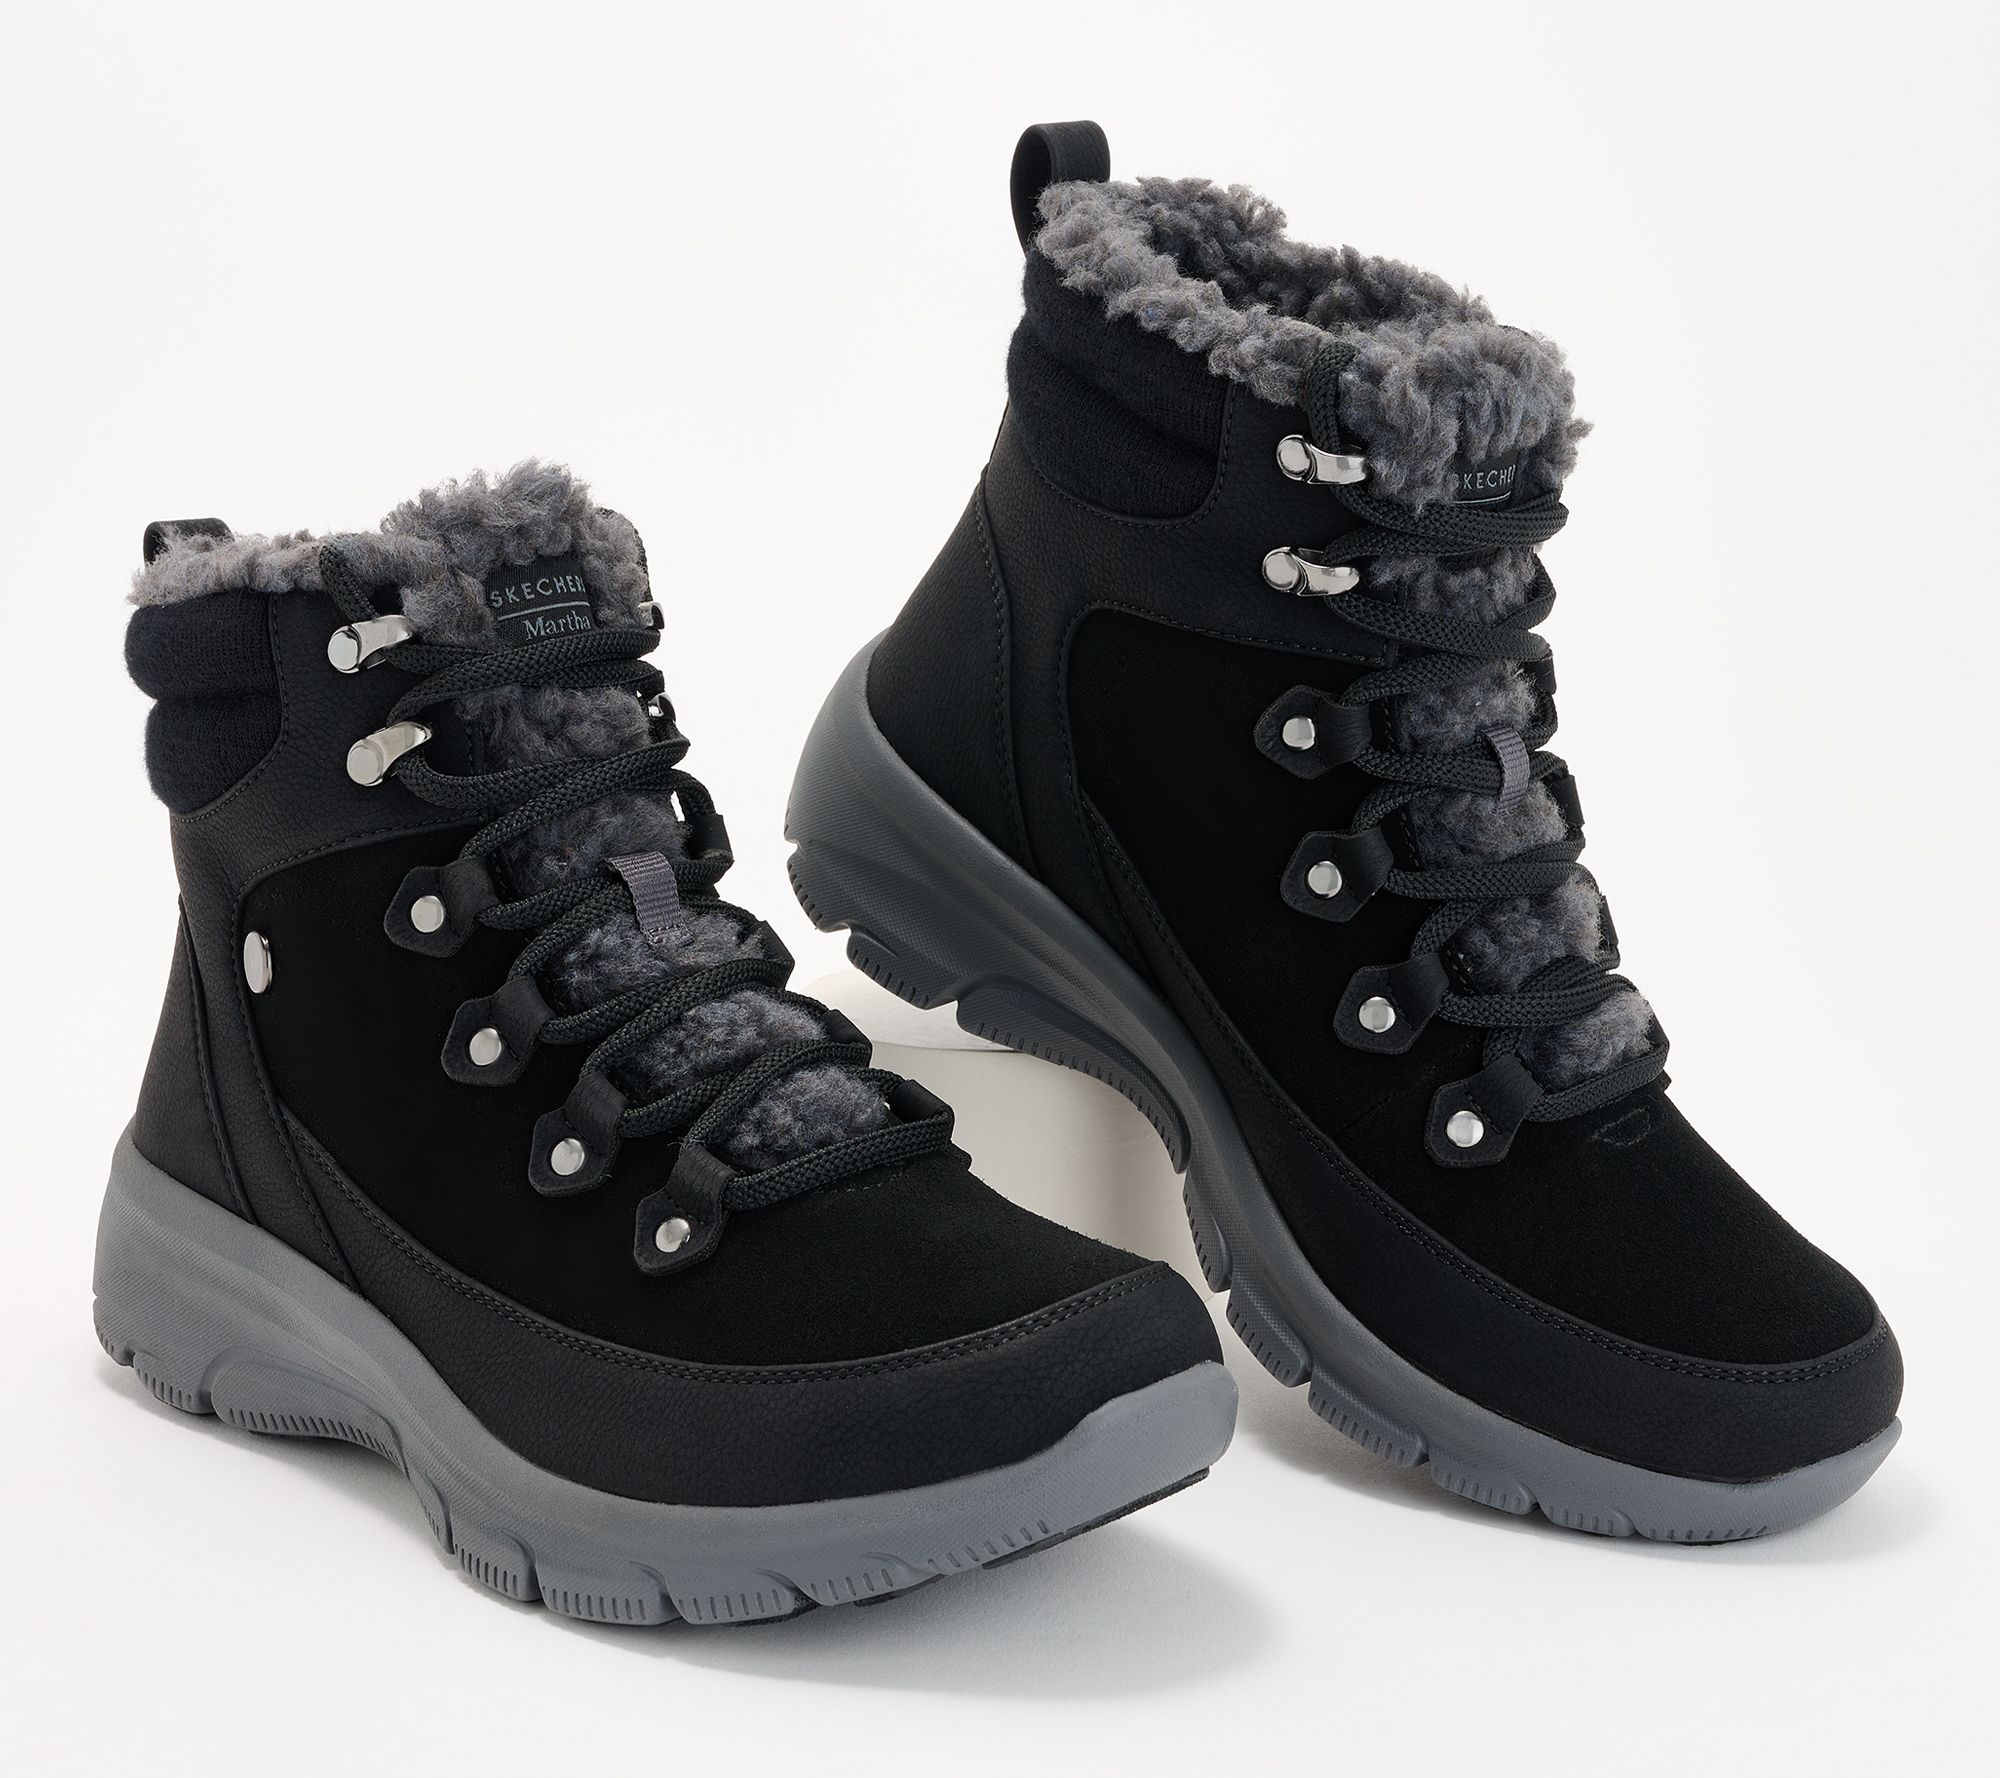 Skechers High Top Lace Up Hiker Boot - QVC UK